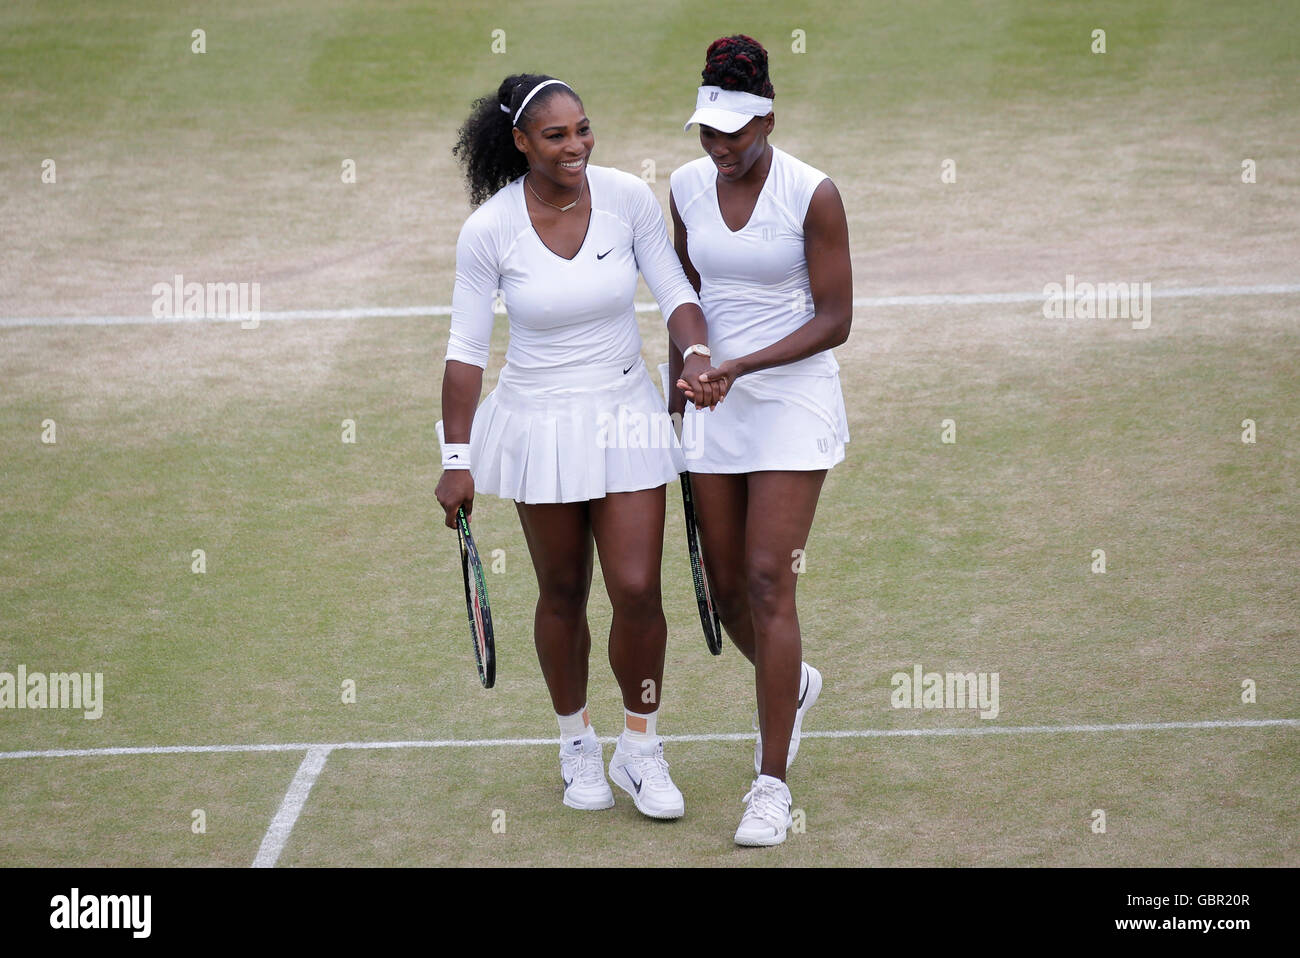 Pin by CANAL ELEBE on Minha Serena  Venus and serena williams, Serena  williams tennis, Serena williams